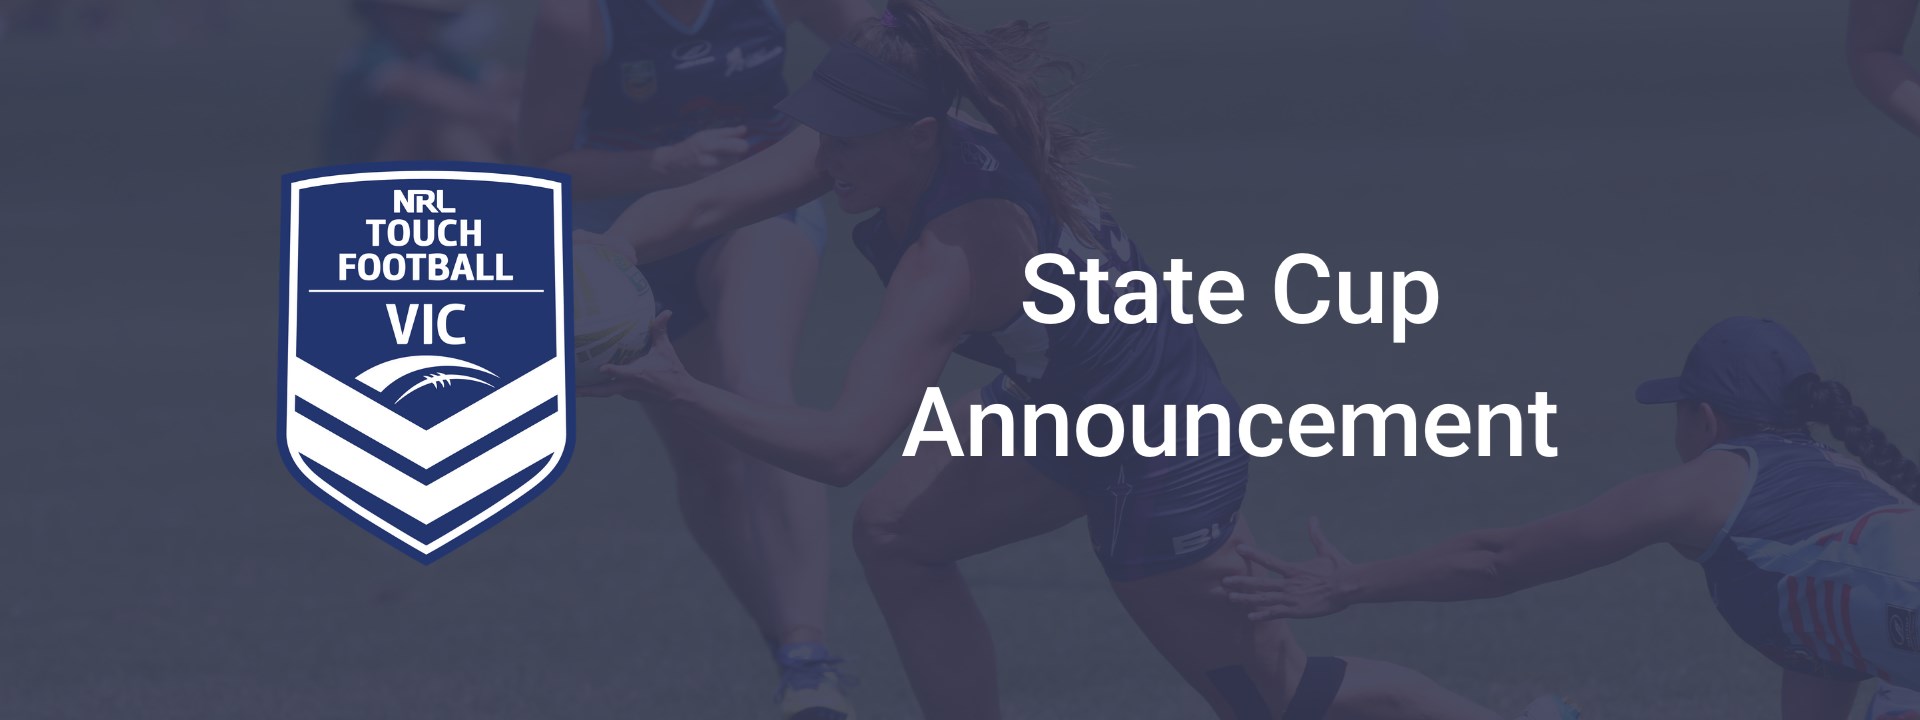 State Cup Announcement